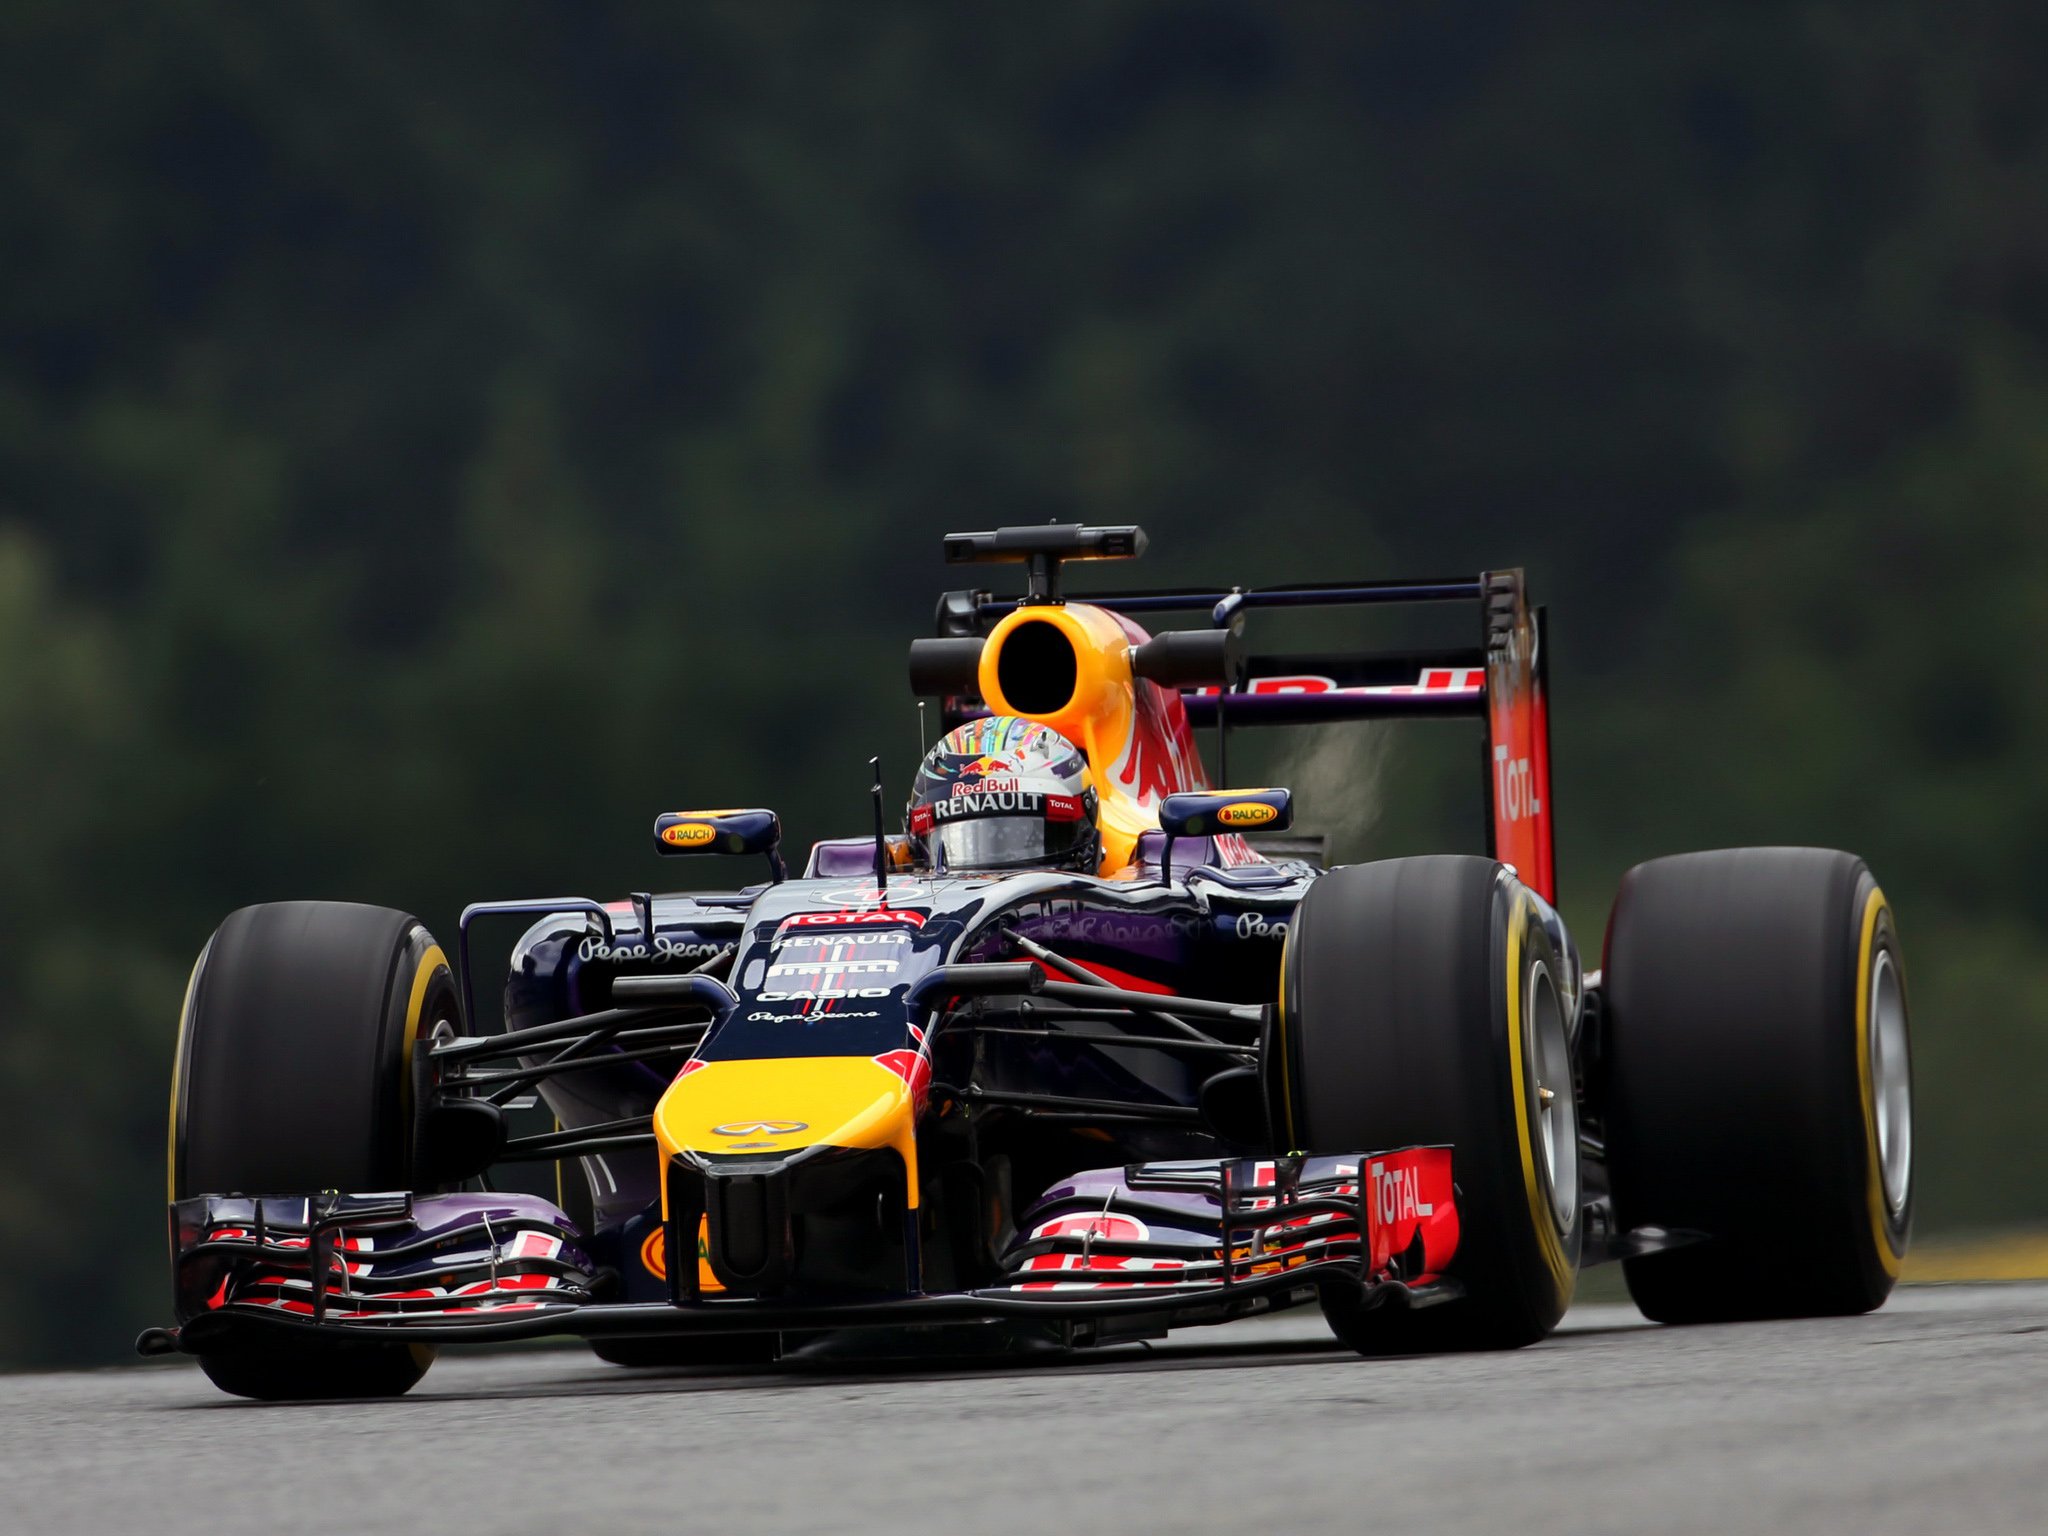 2014, Red, Bull, Rb10, Formula, F 1, Race, Racing Wallpapers HD